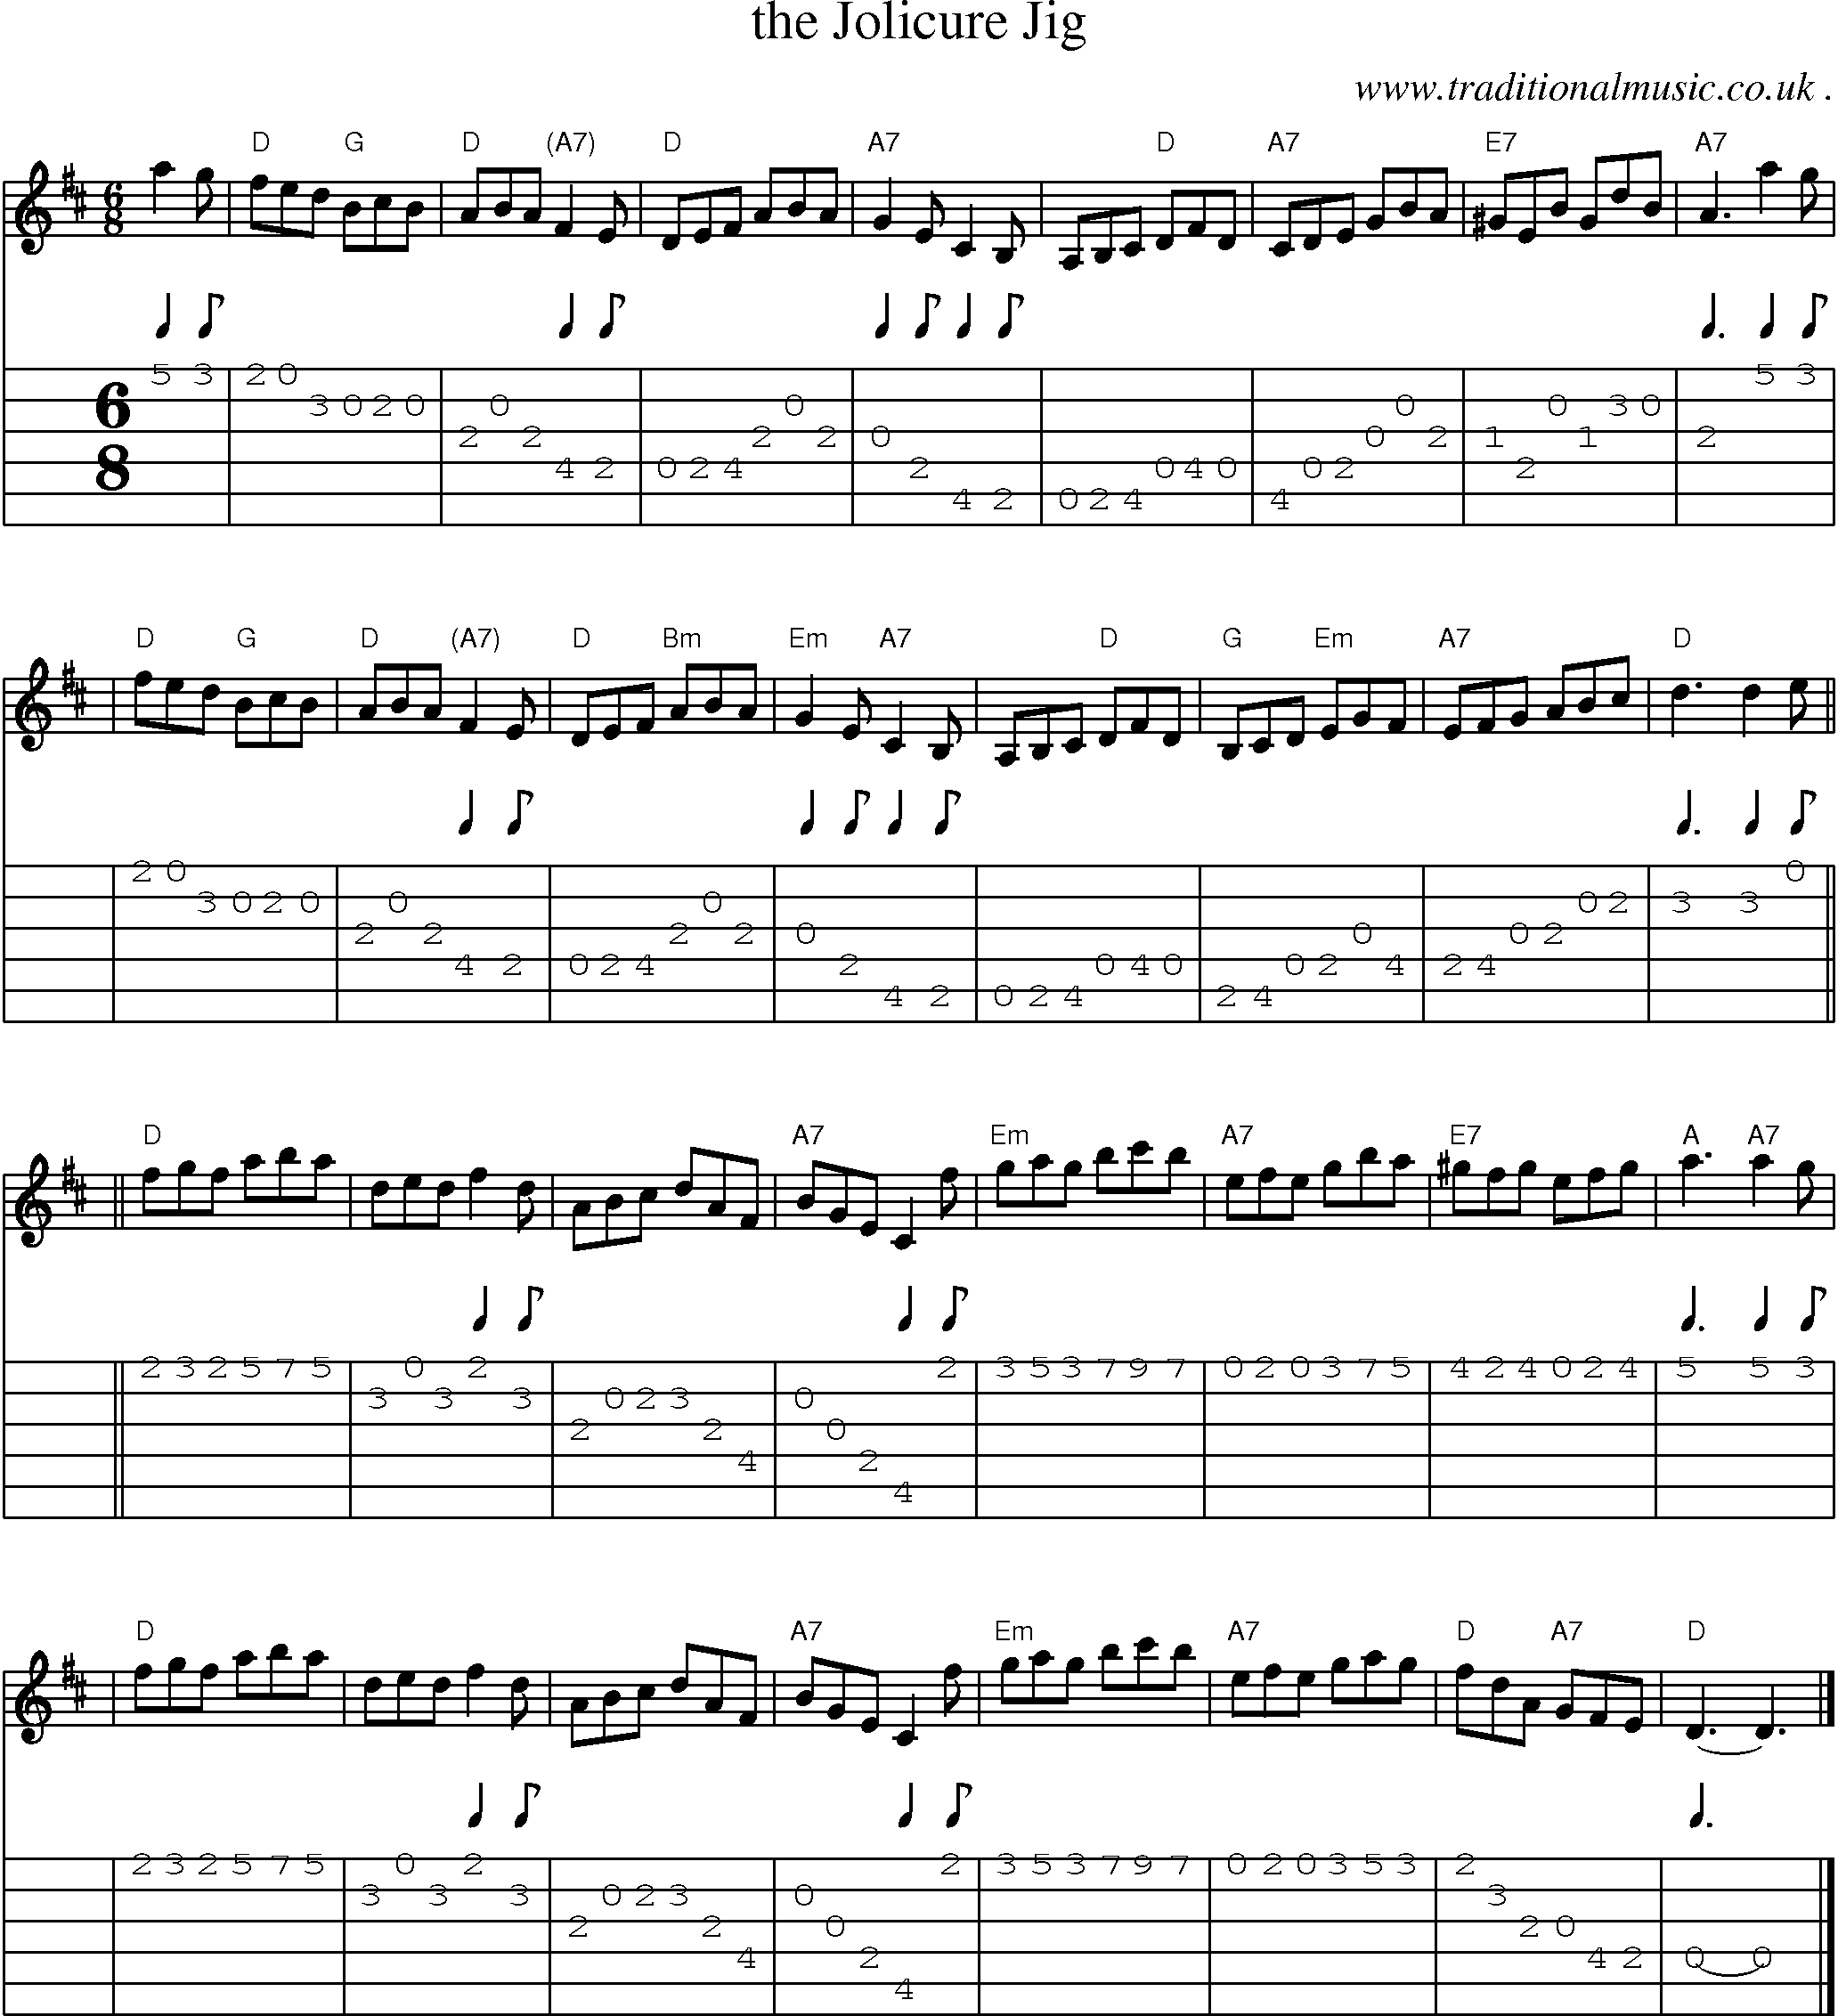 Sheet-music  score, Chords and Guitar Tabs for The Jolicure Jig